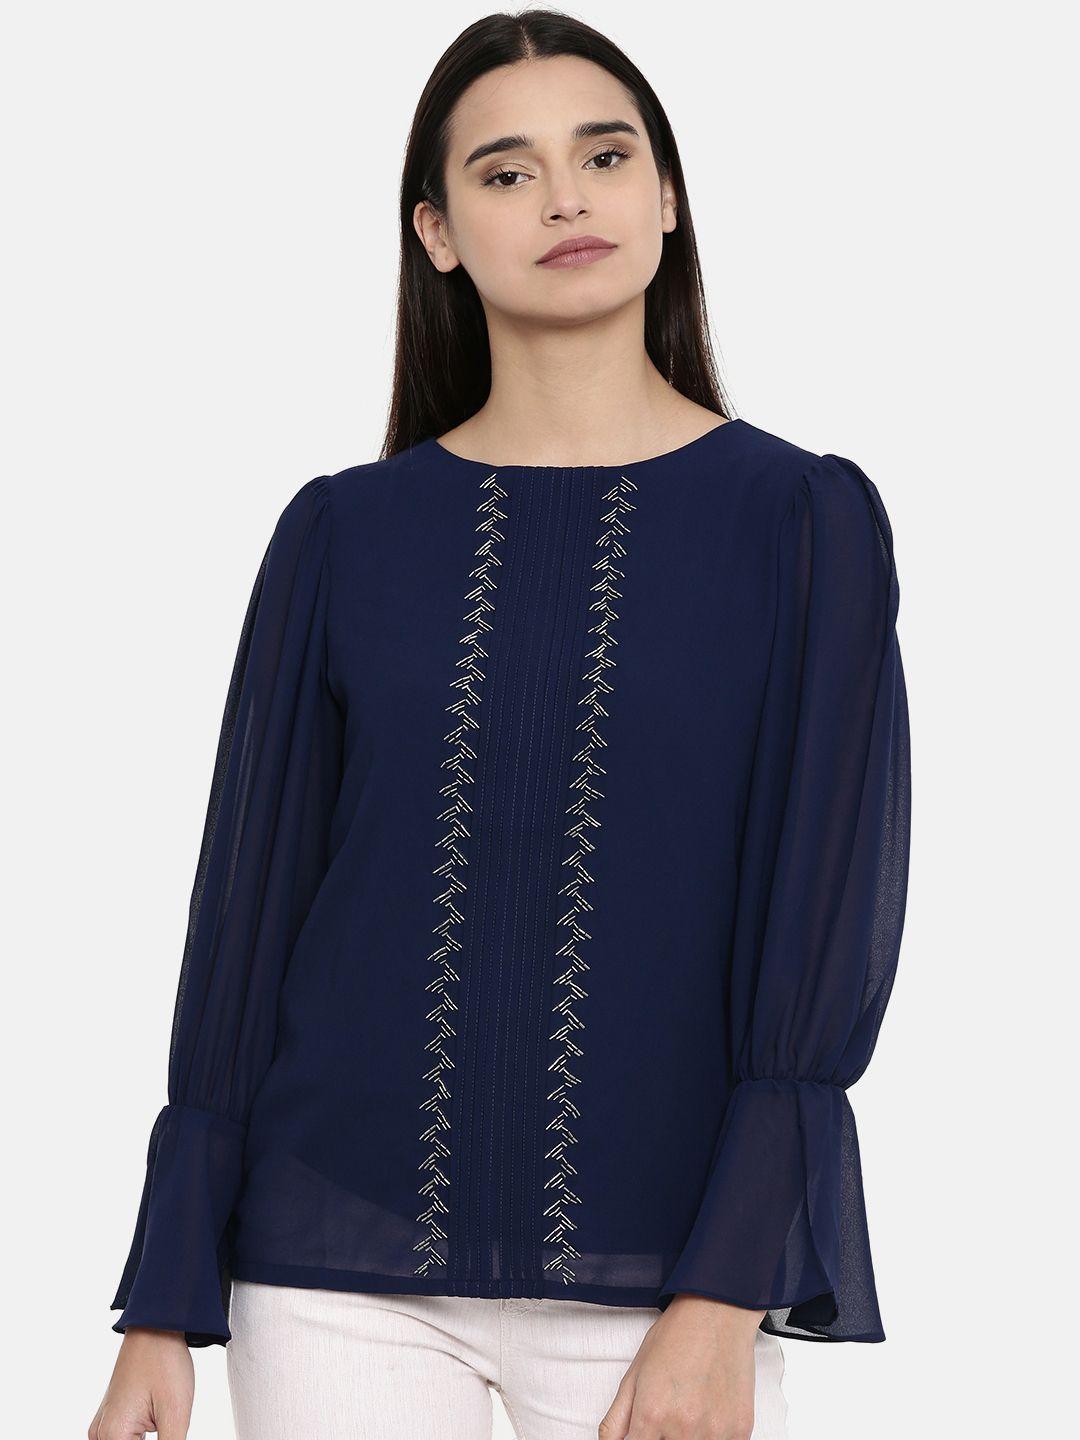 and women navy blue embellished top